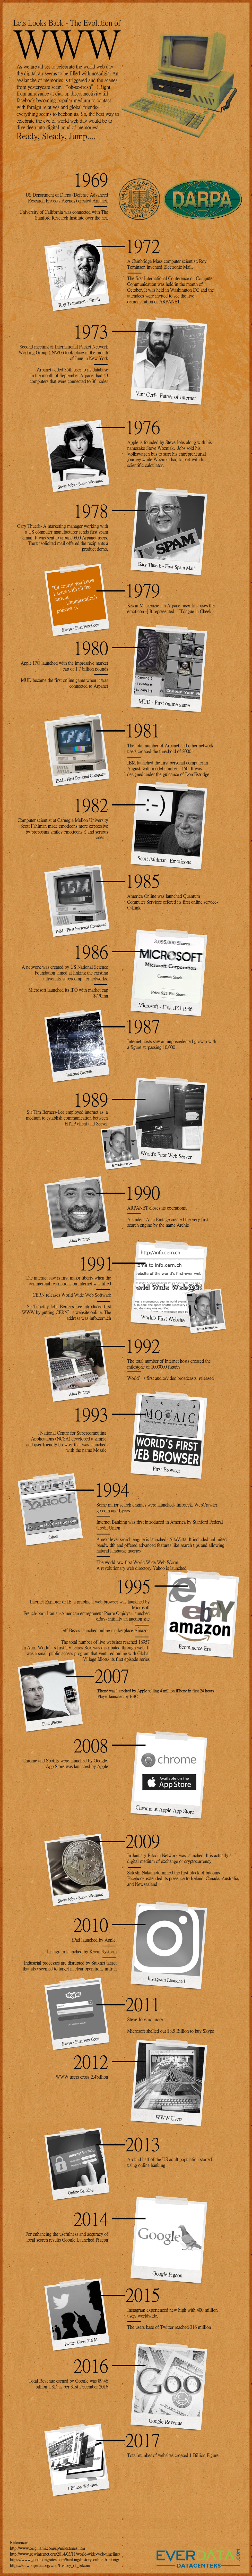 Infographic - Lets Looks back- The evolution of WWW